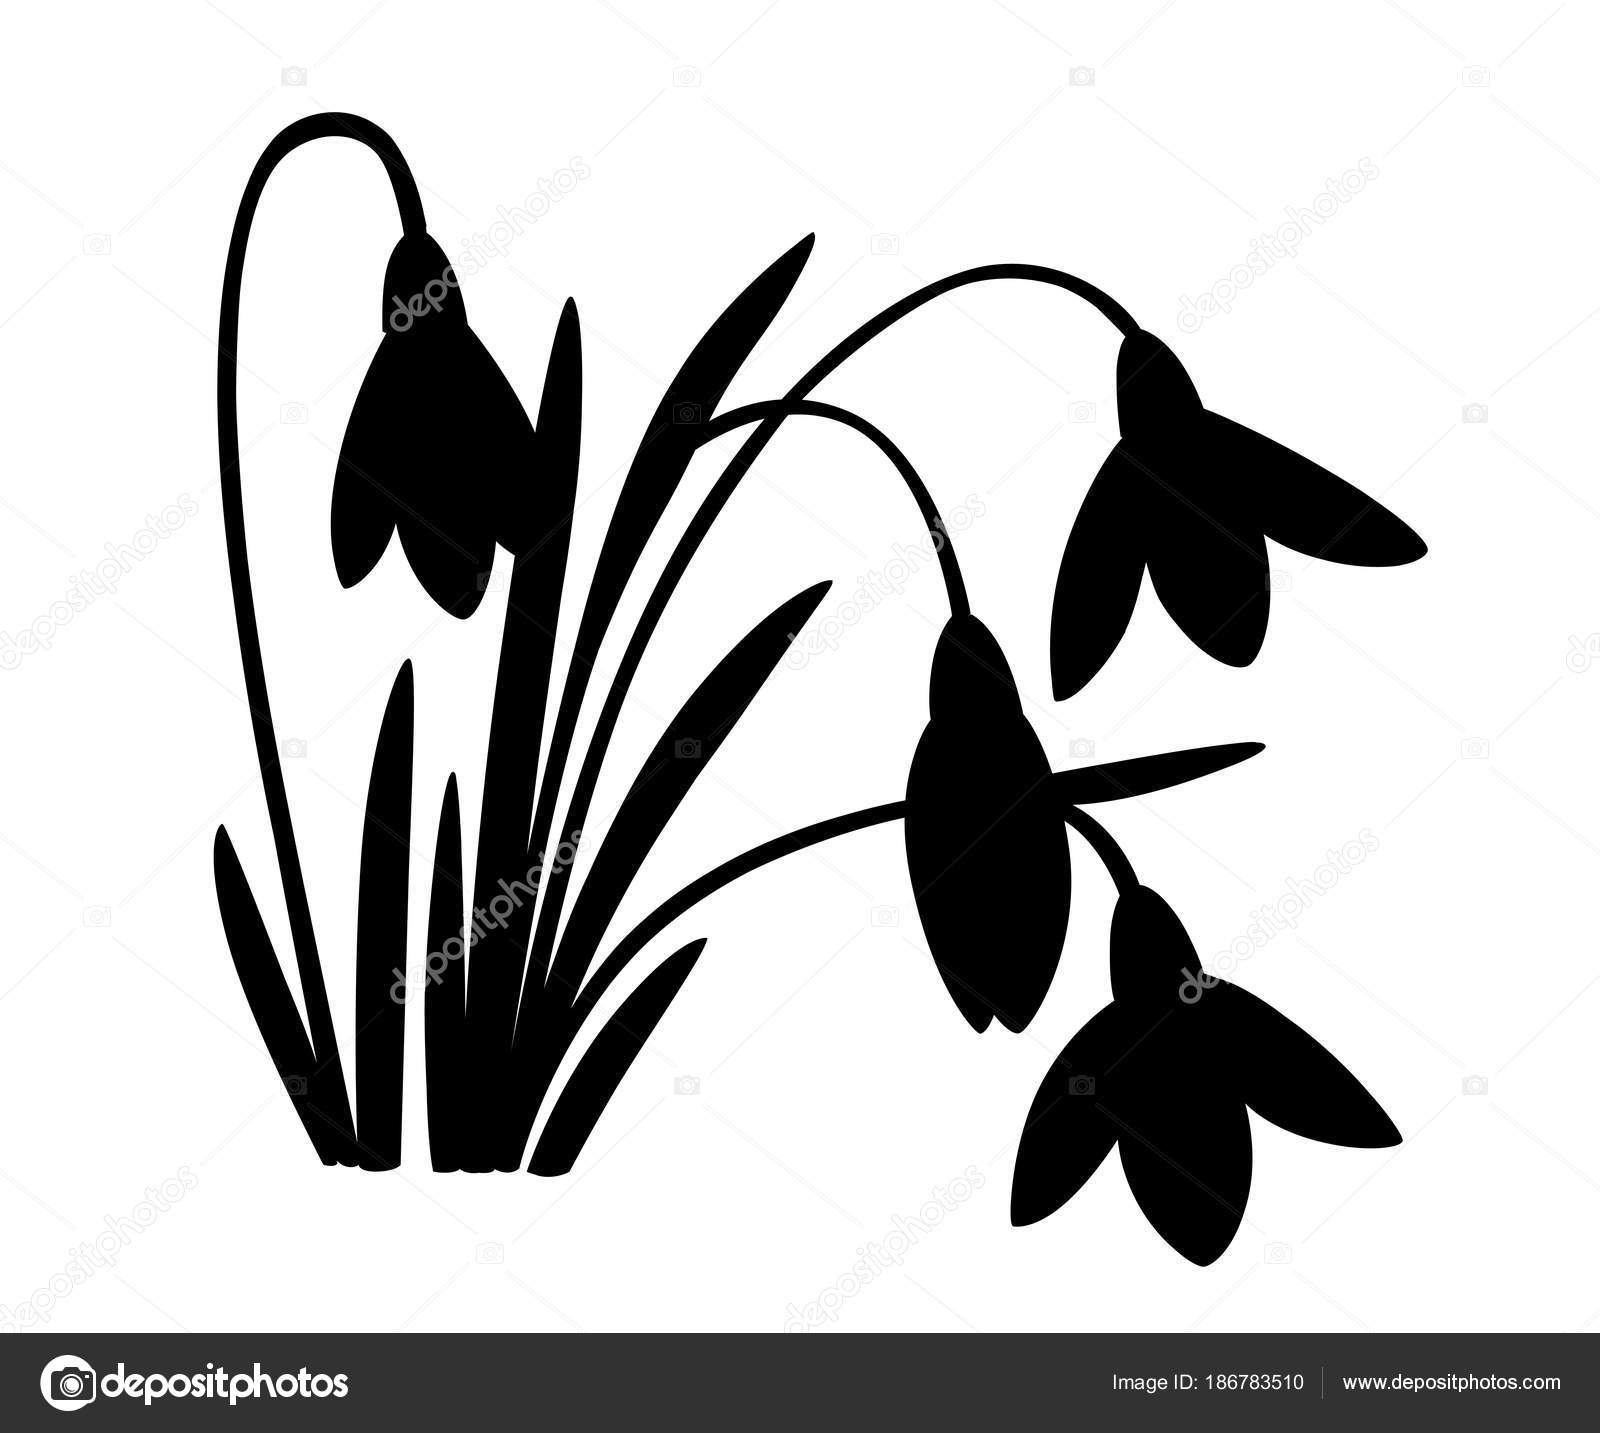 Set of flower silhouette vector illustrations. Snowdrop, daffodil